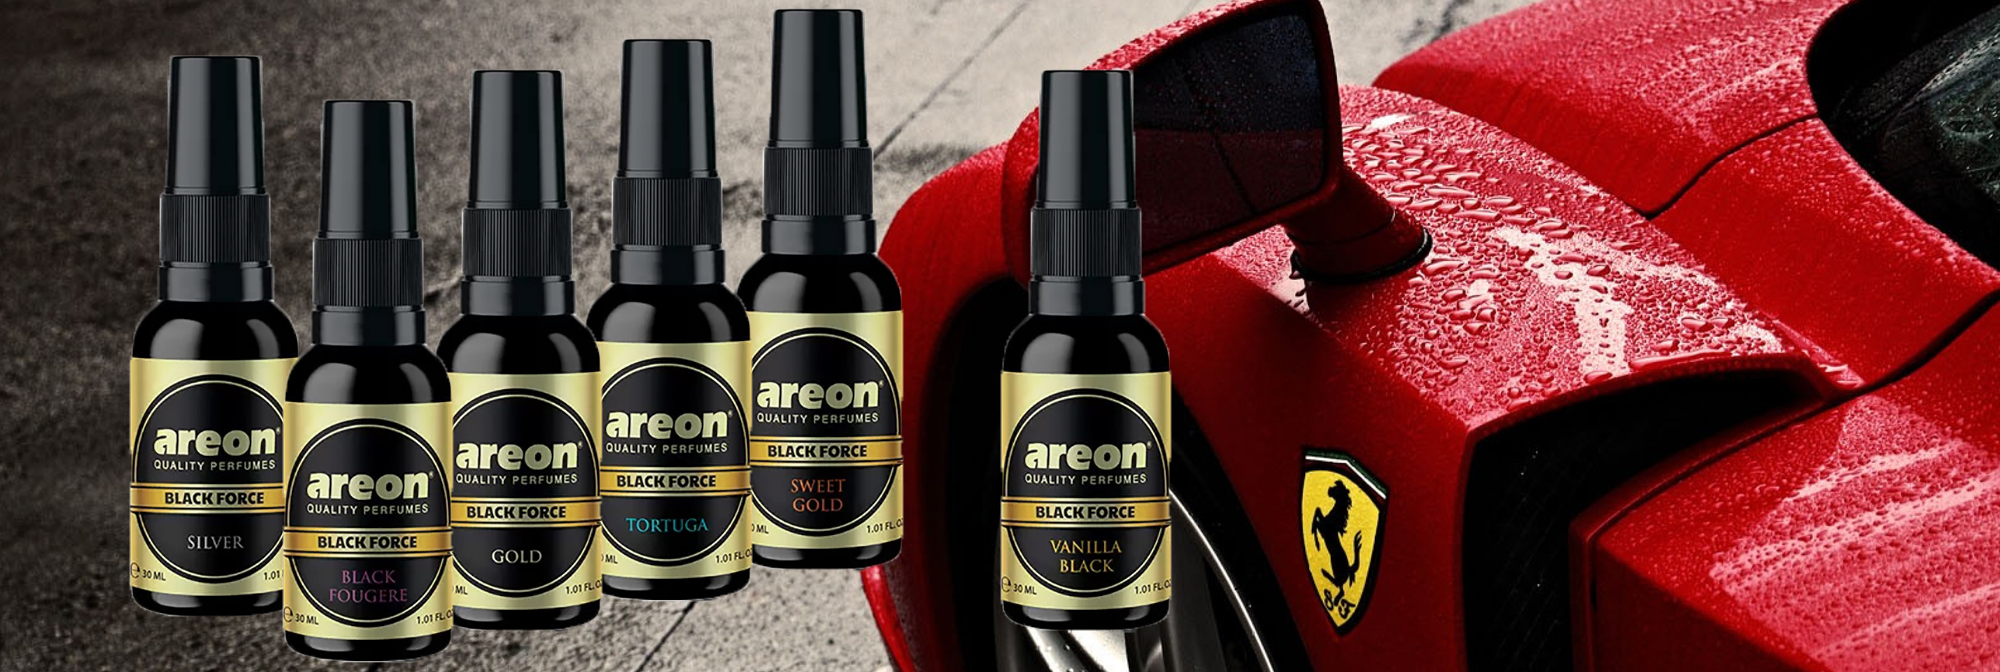 Areon Perfumes Black Force